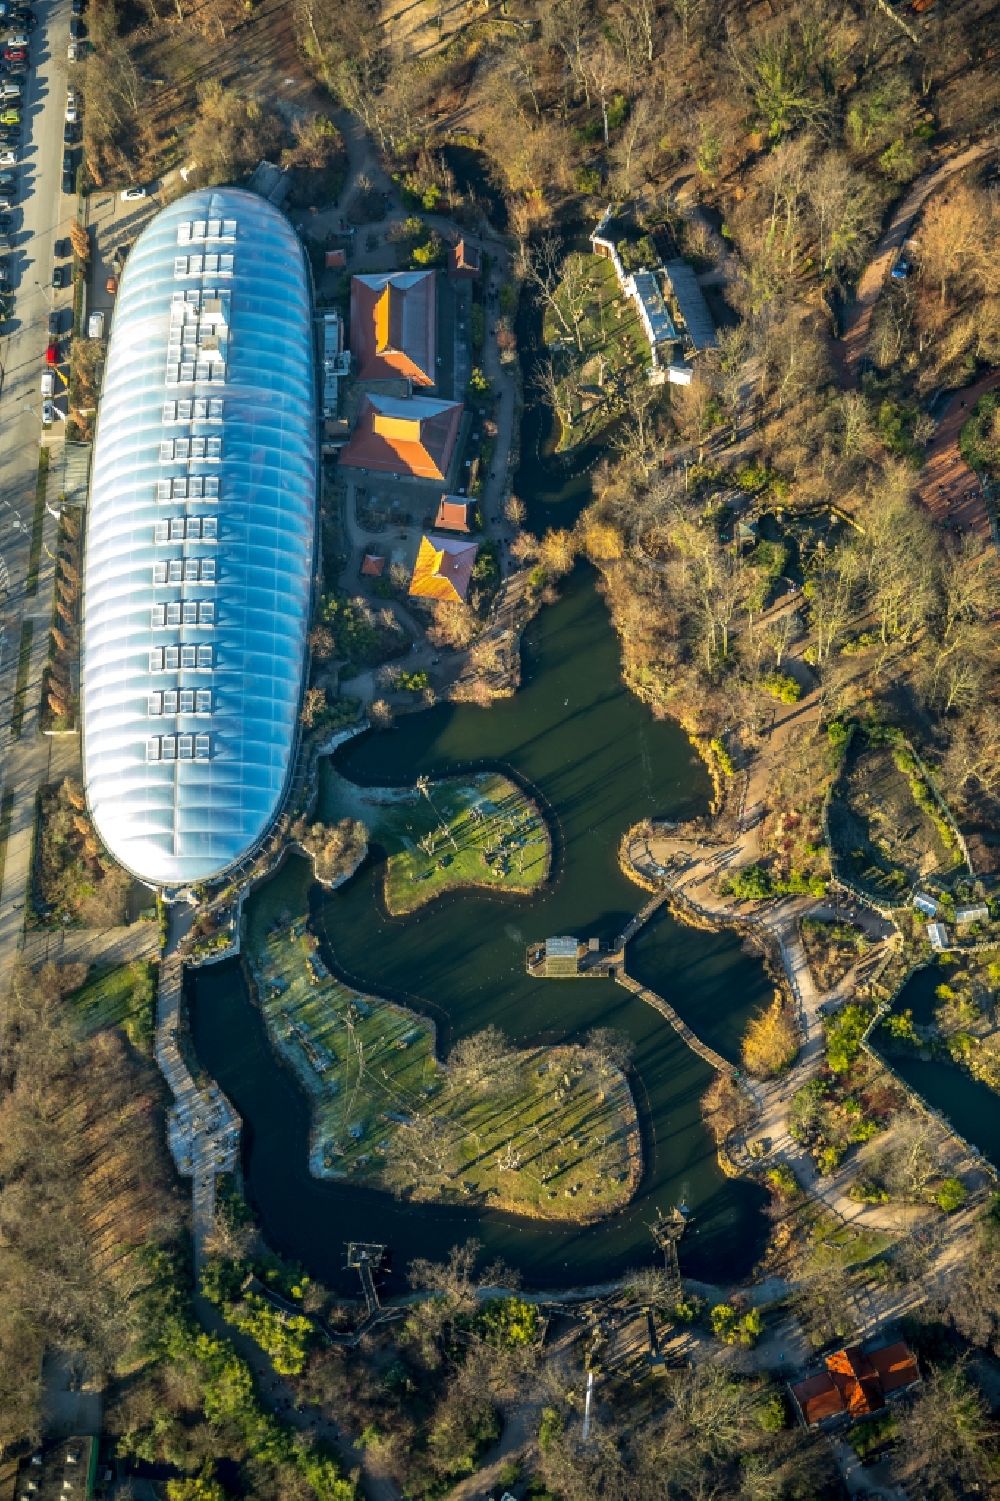 Gelsenkirchen from above - Zoo grounds of ZOOM Erlebniswelt on Asienhalle in the district Bismarck in Gelsenkirchen in the state North Rhine-Westphalia, Germany